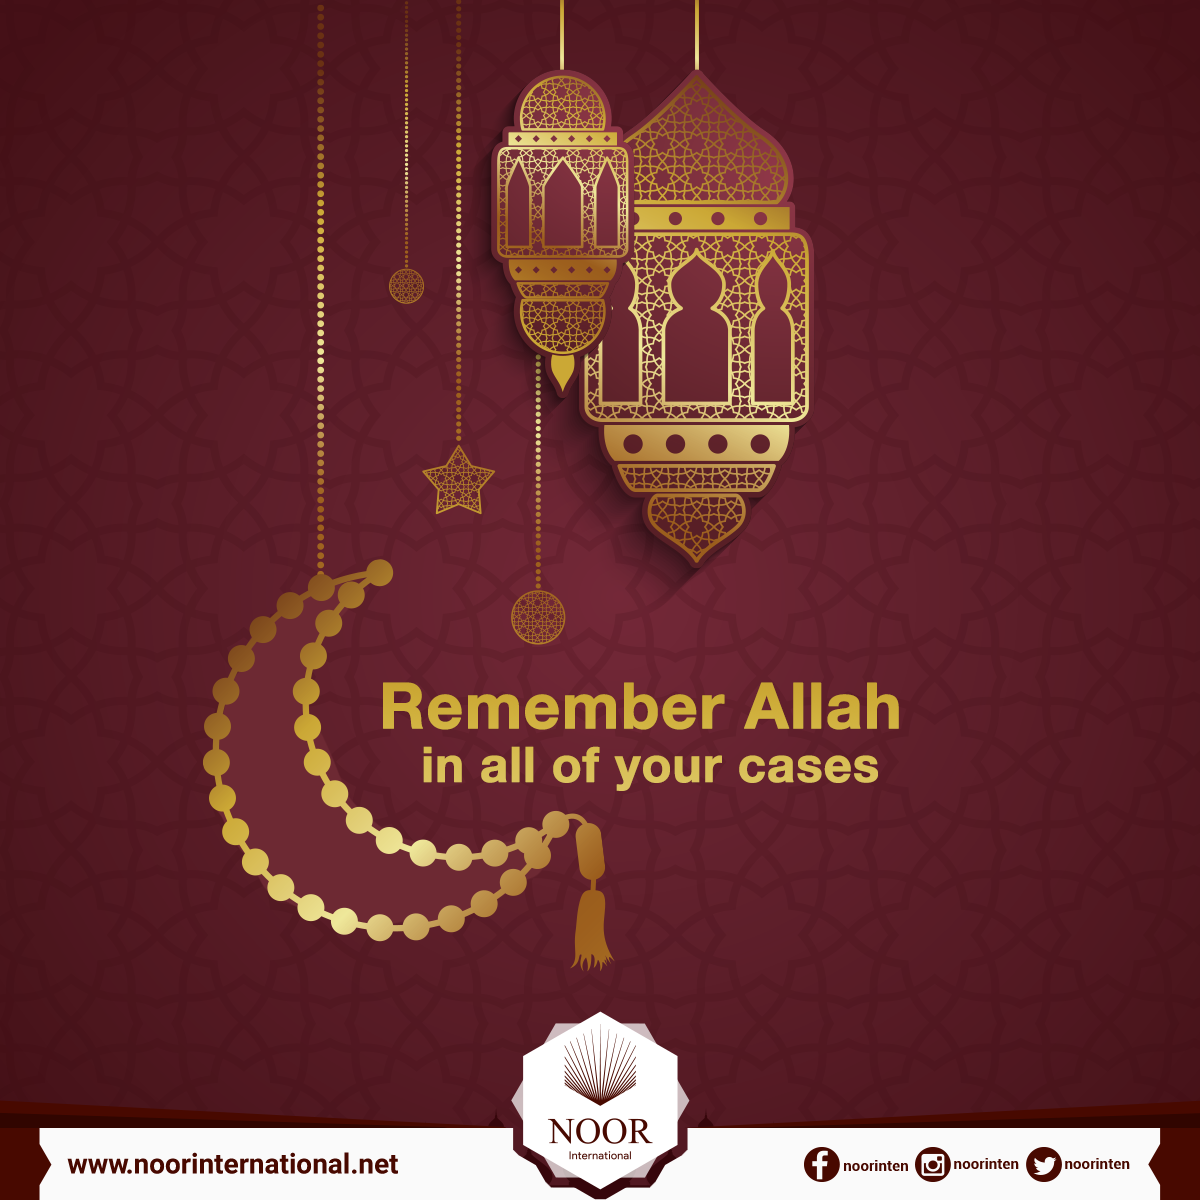 Remember Allah in all of your cases